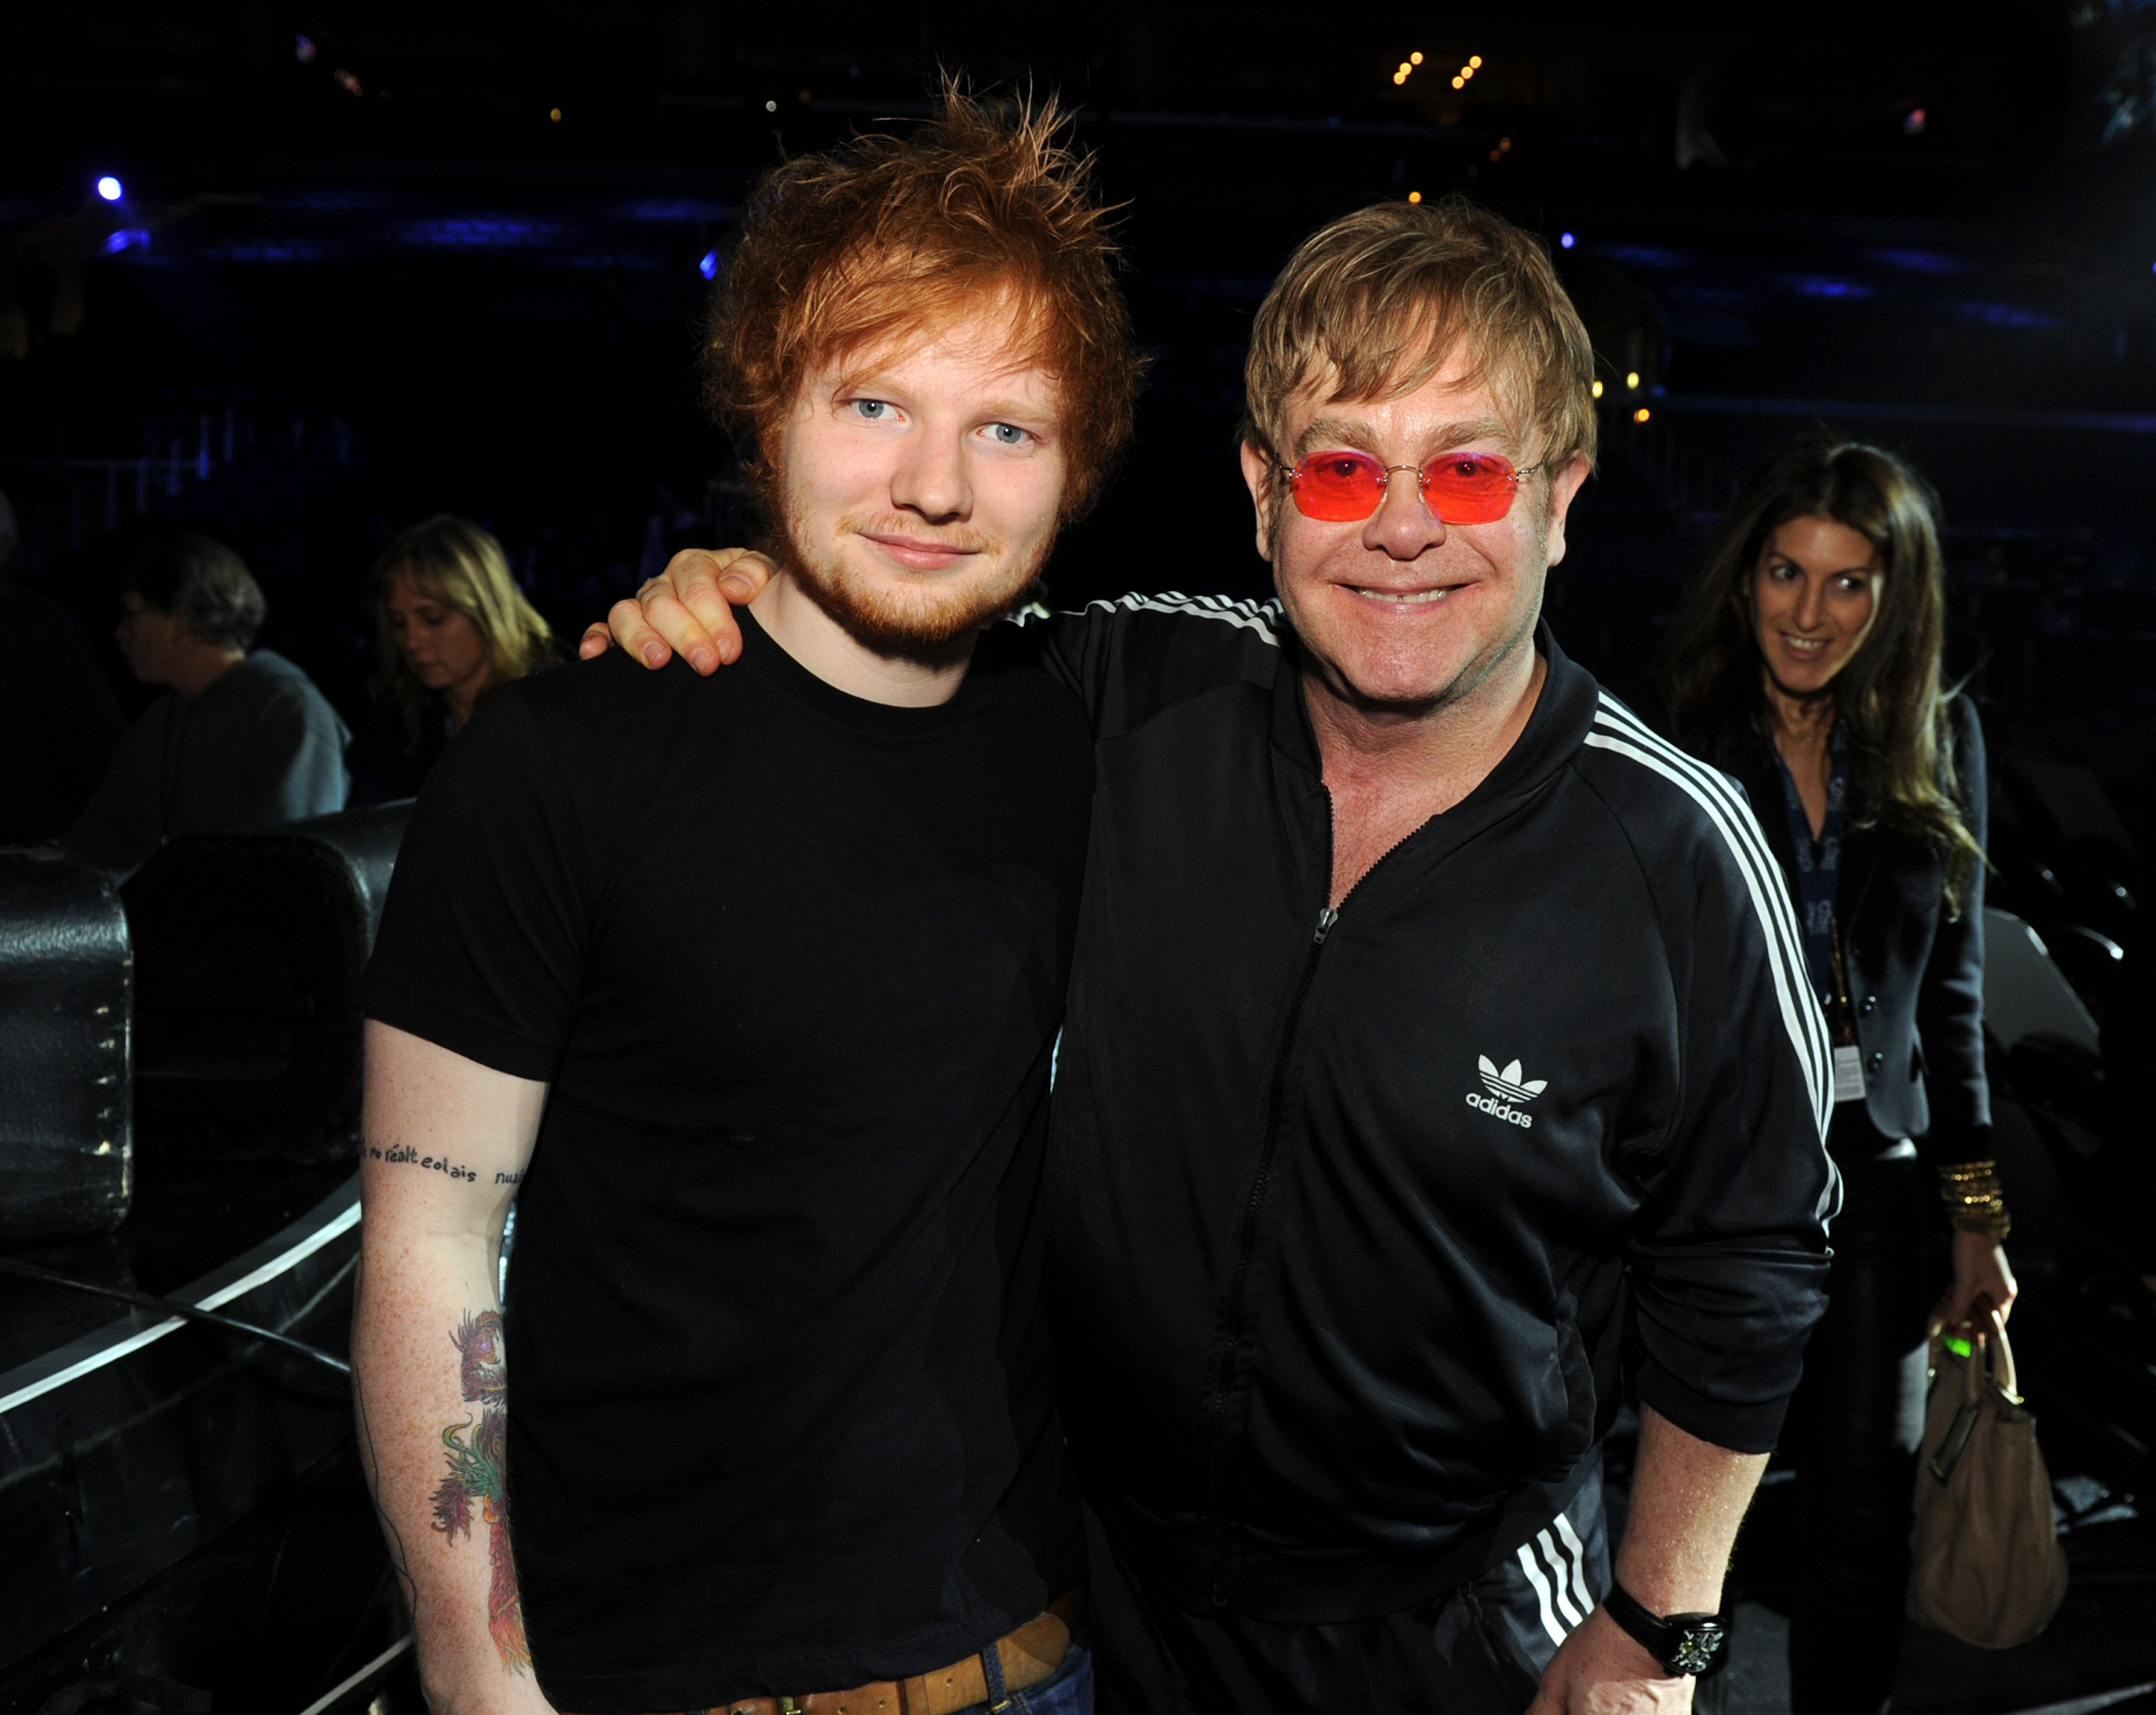 Sheeran and John pose for a photo together at an event